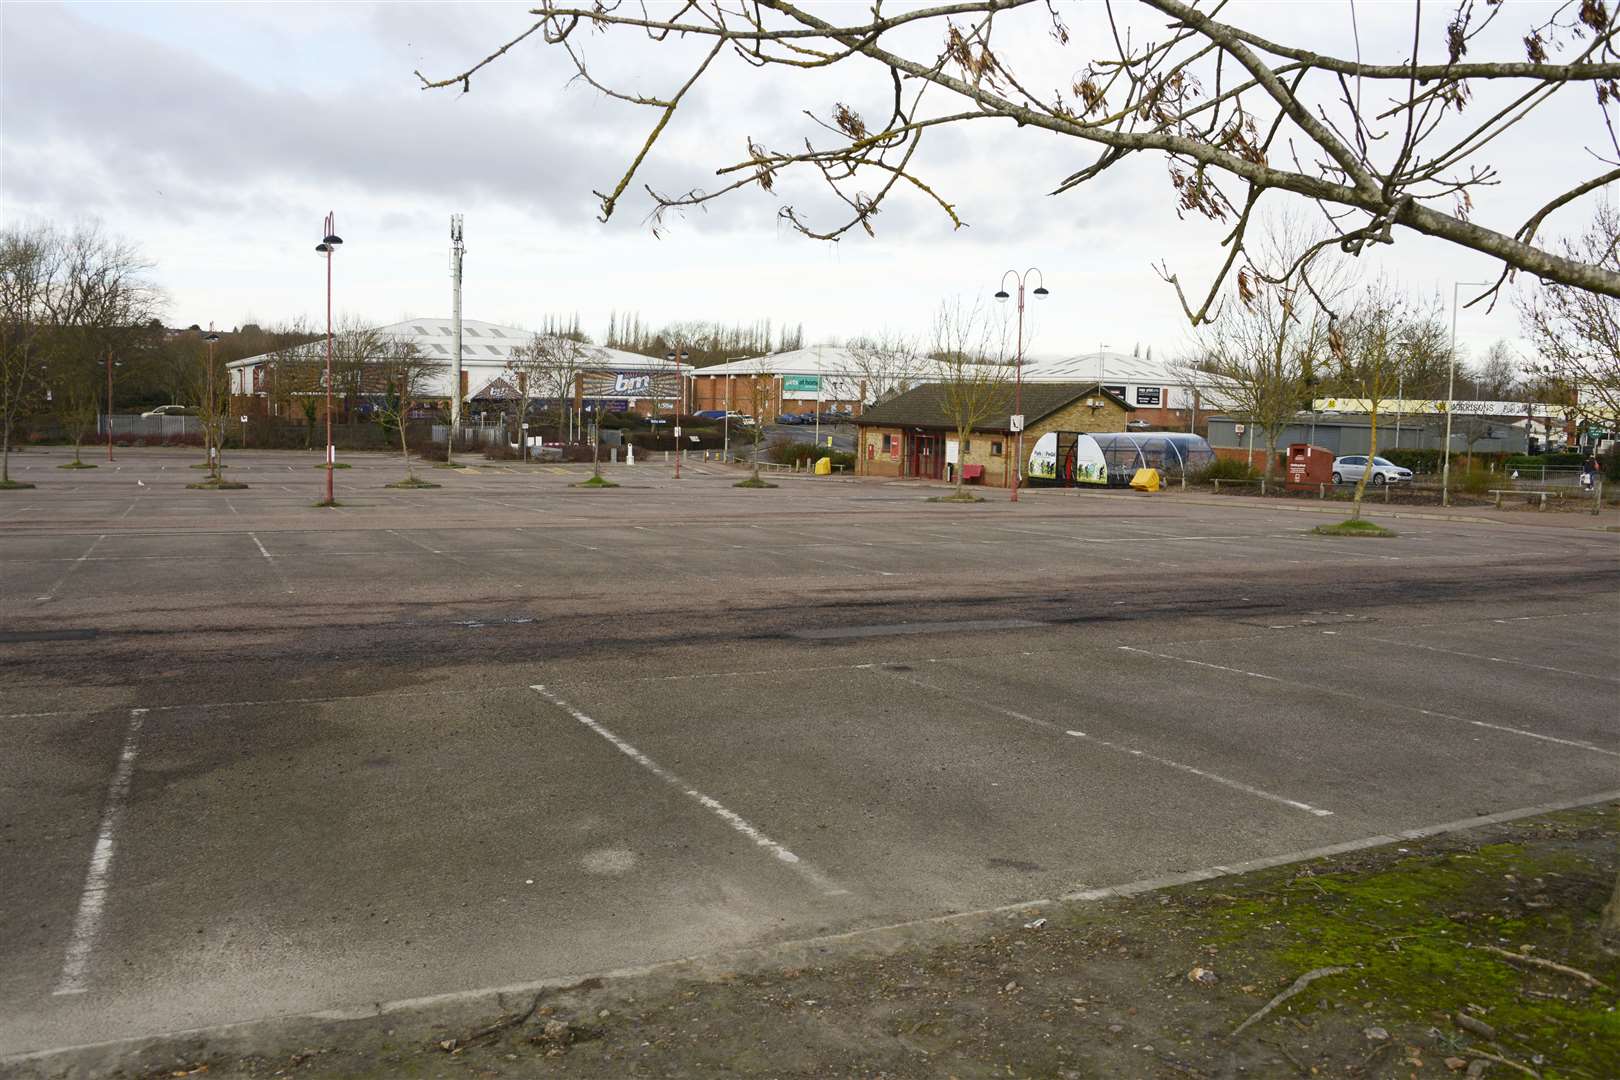 The current car park is set to be expanded